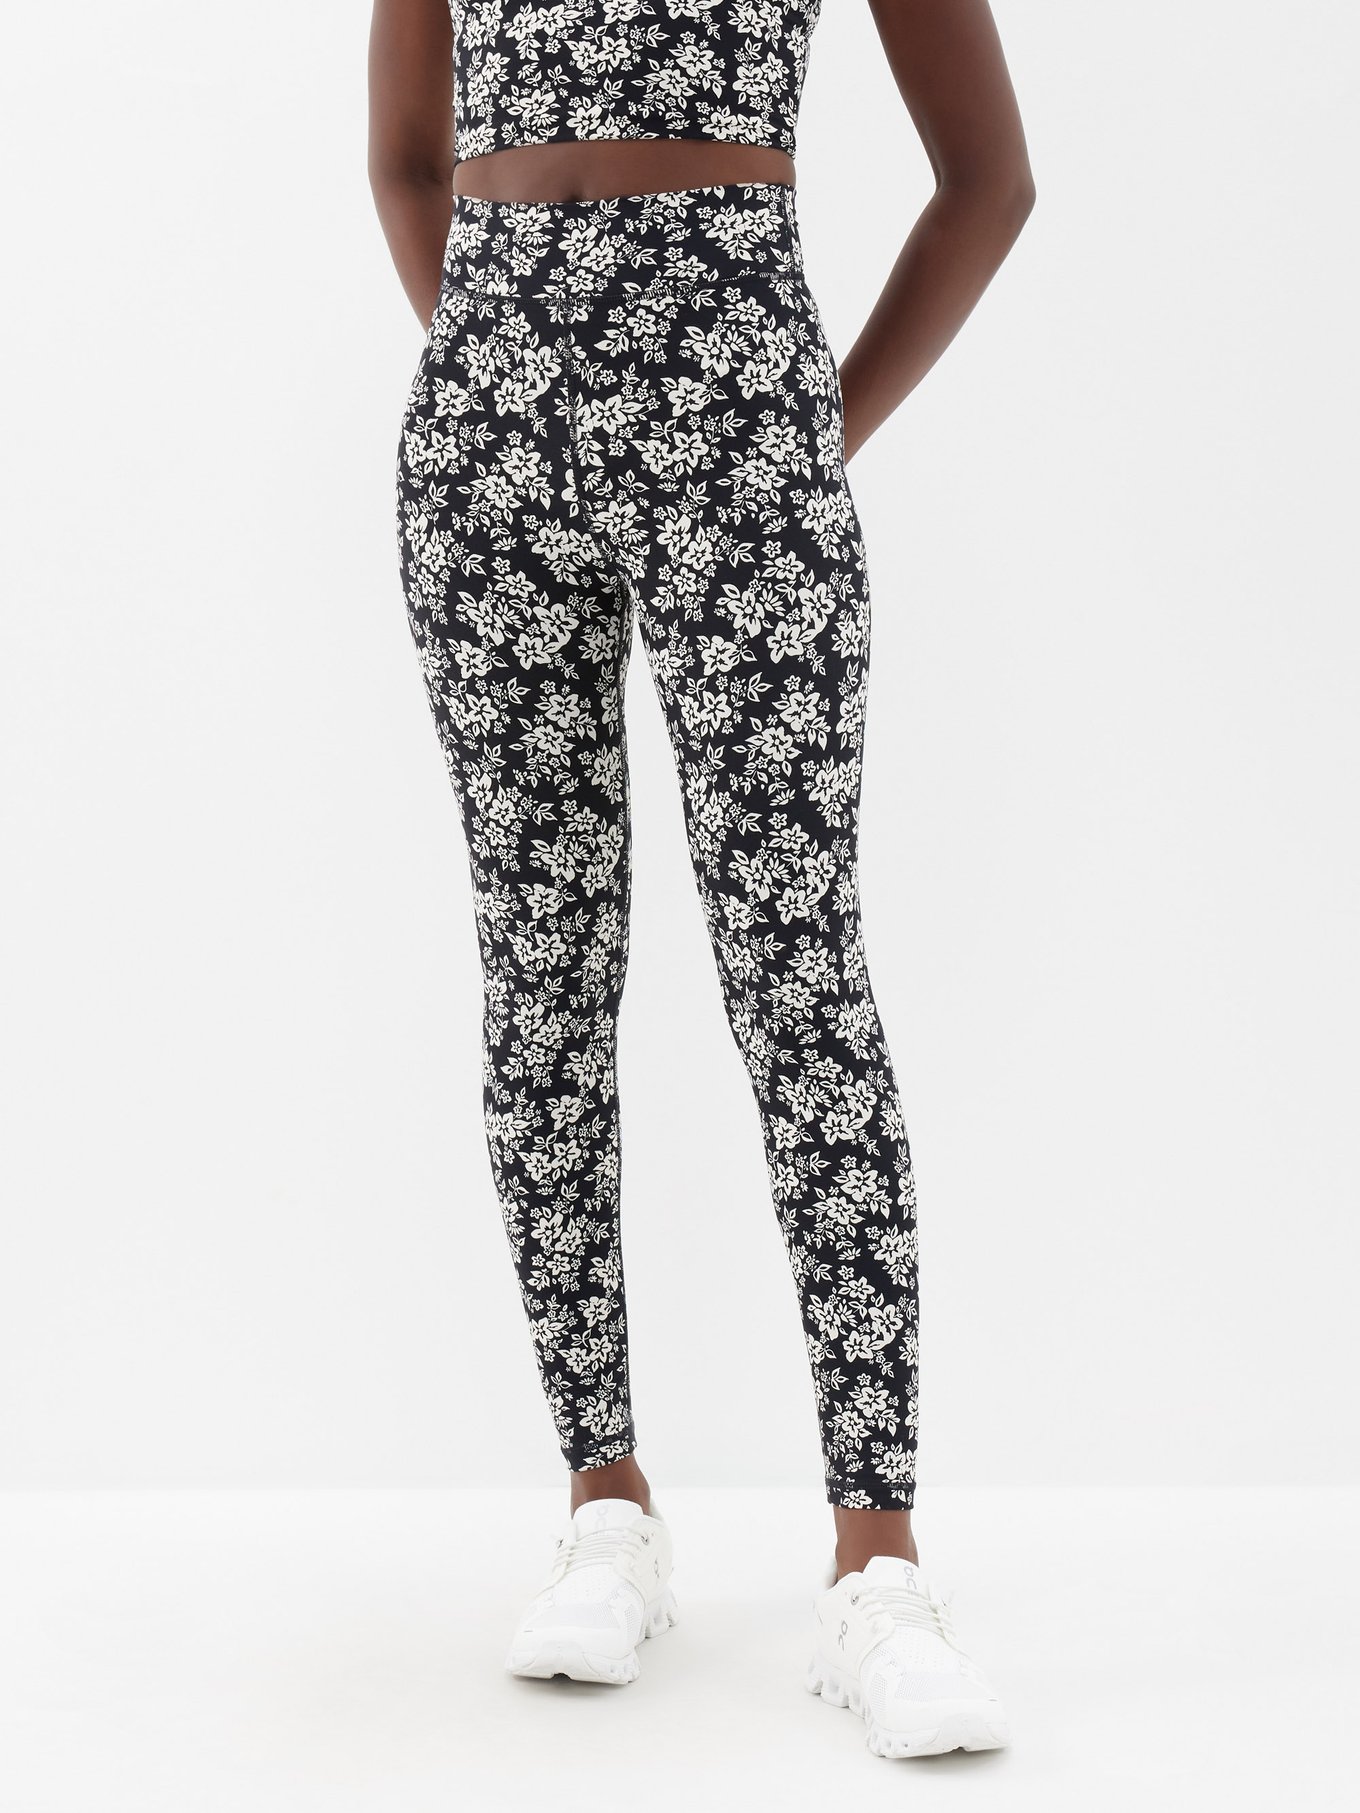 Black and White All-Over Print Plus Size Leggings - Nikki D. May